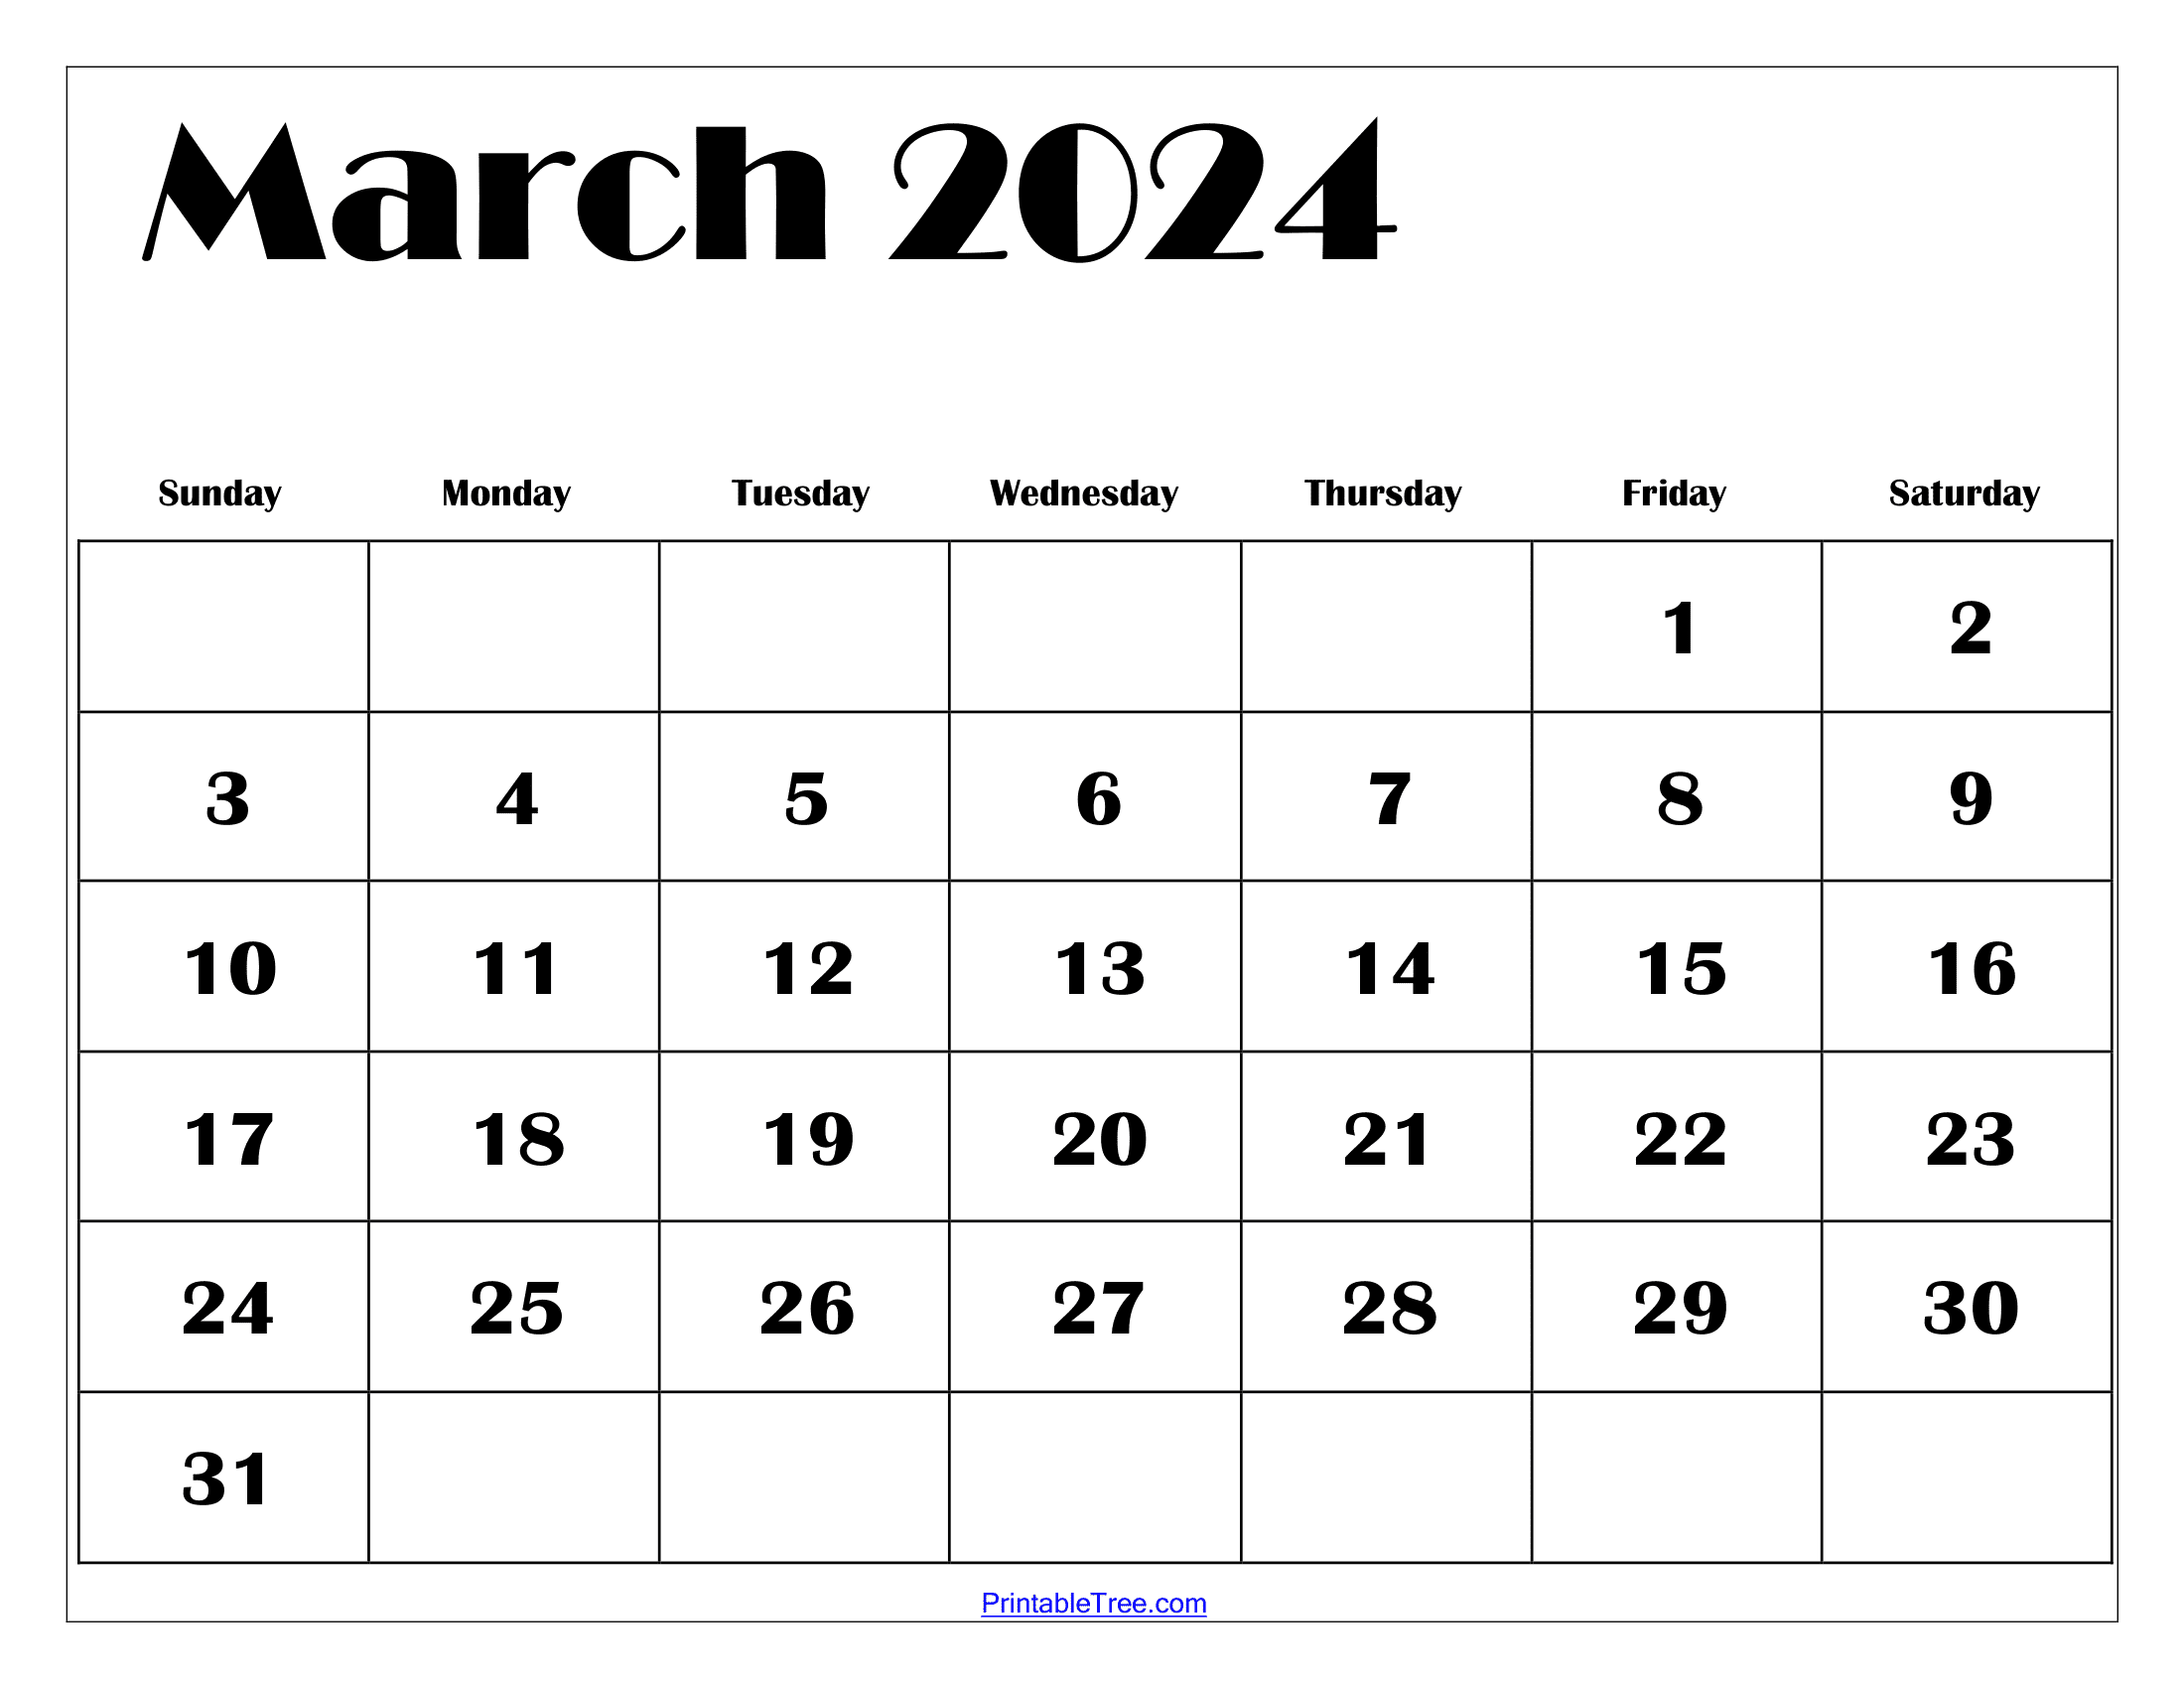 March 2024 Calendar Printable Pdf With Holidays Template Free intended for Free Printable Big Bold 2024 Calendar